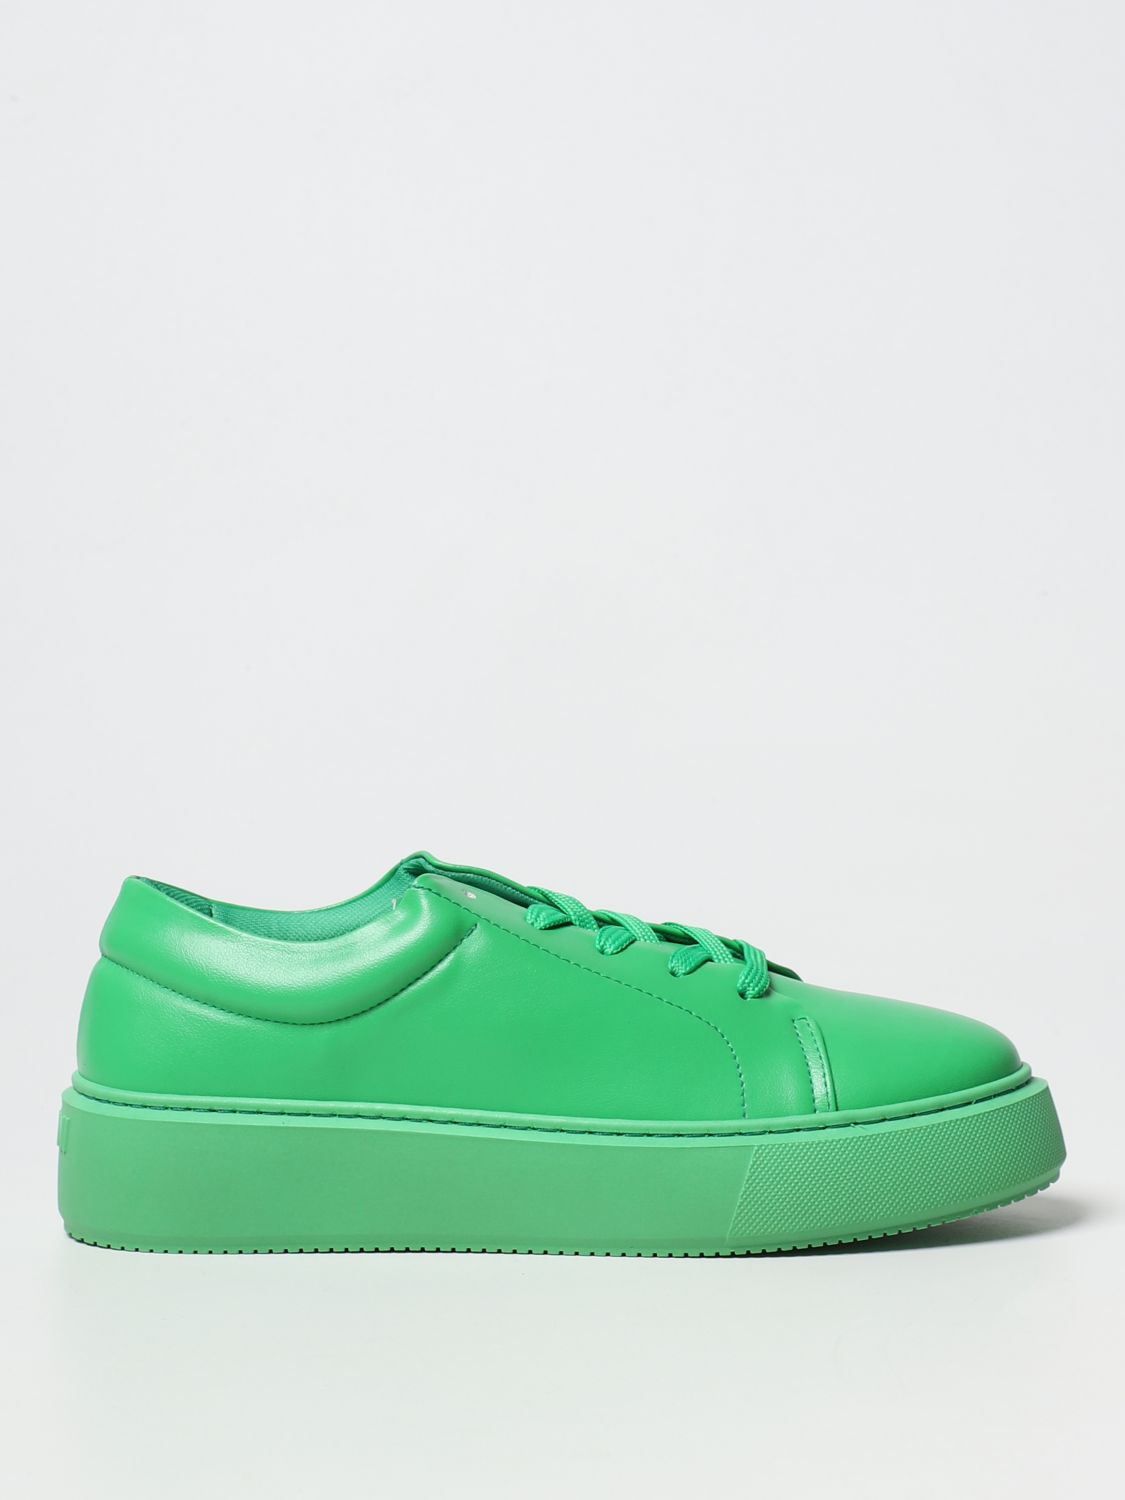 GANNI: Sporty sneakers in synthetic leather - Green | Ganni sneakers ...